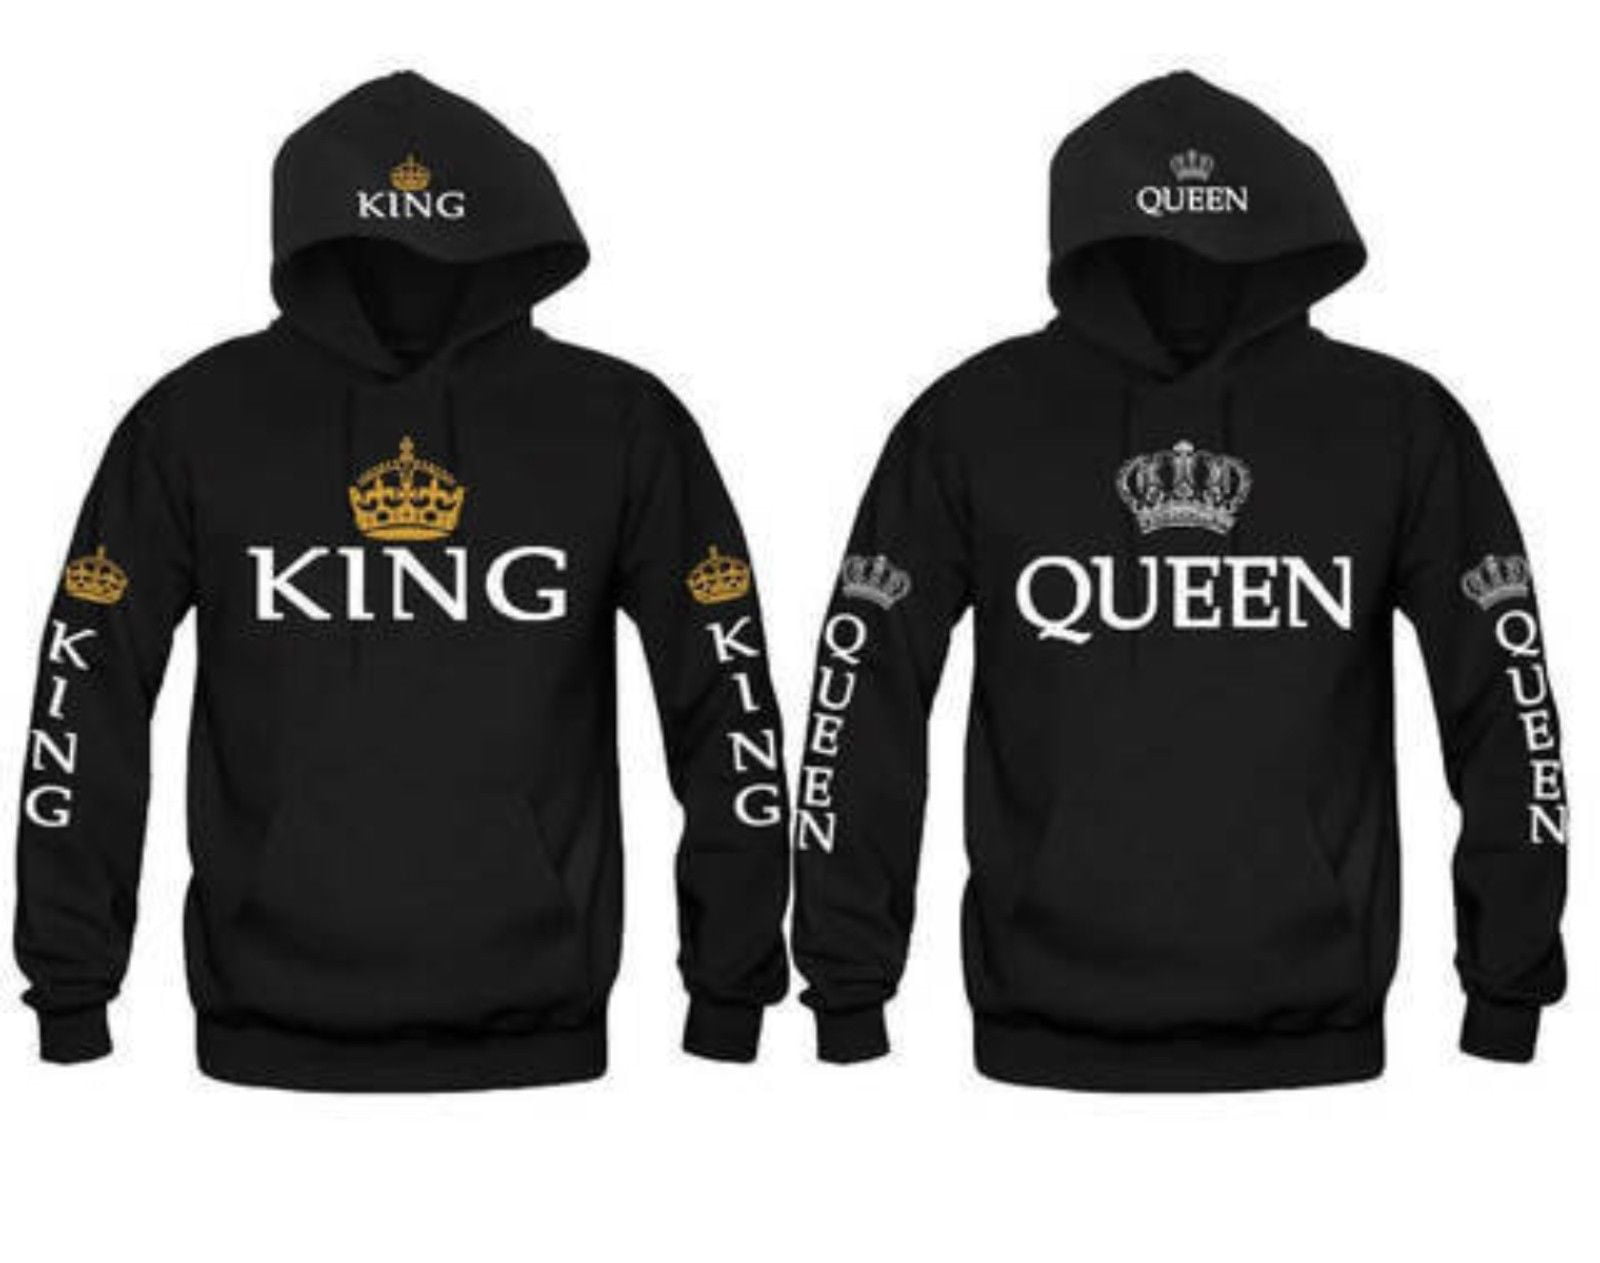 King & Queen Couple Hoodies New Color His And Hers Love Matching Sweatshirts 